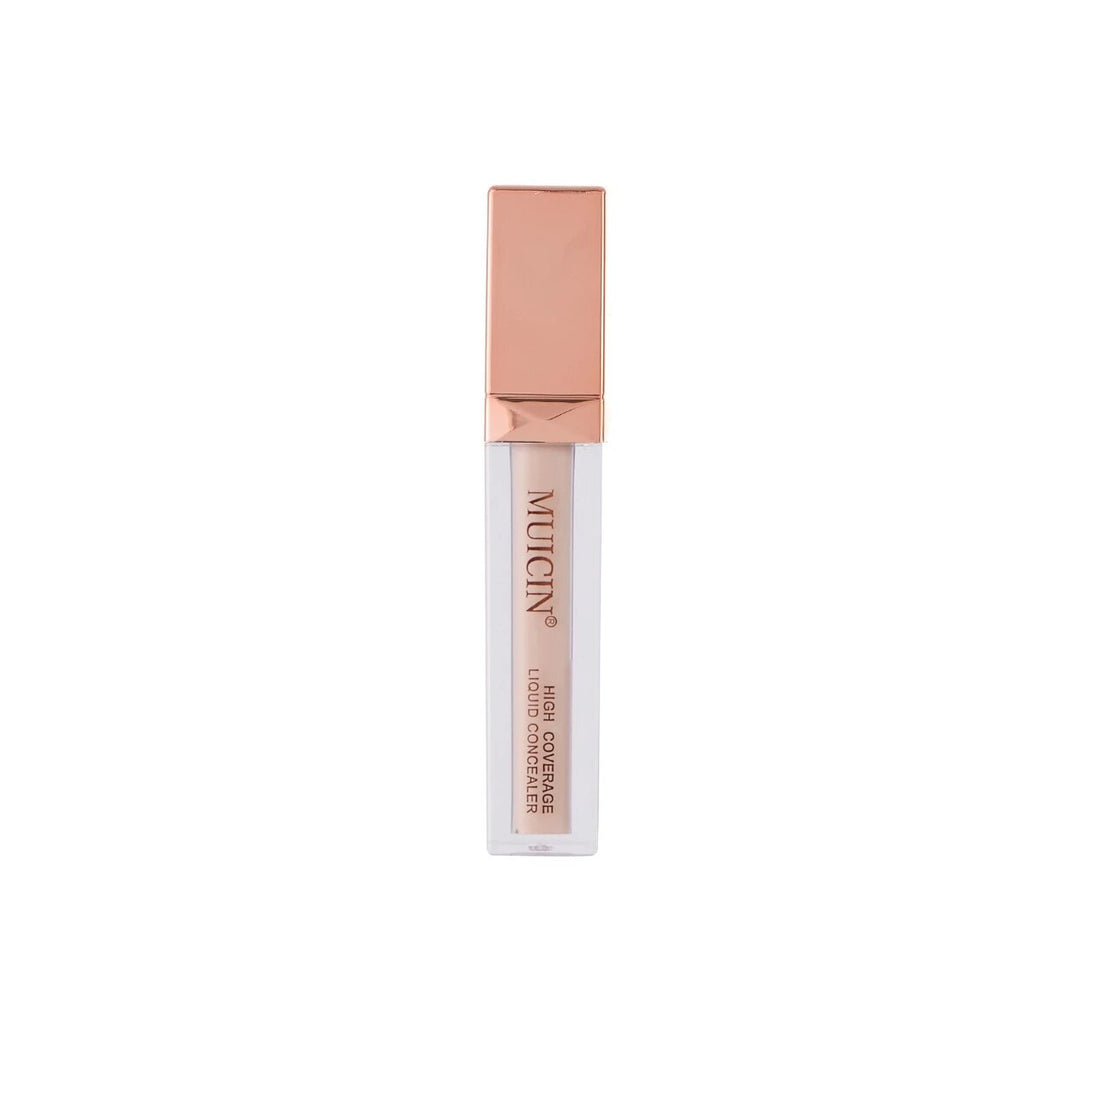 Gold Hd Coverage Liquid Concealer - 6G Classic Ivory